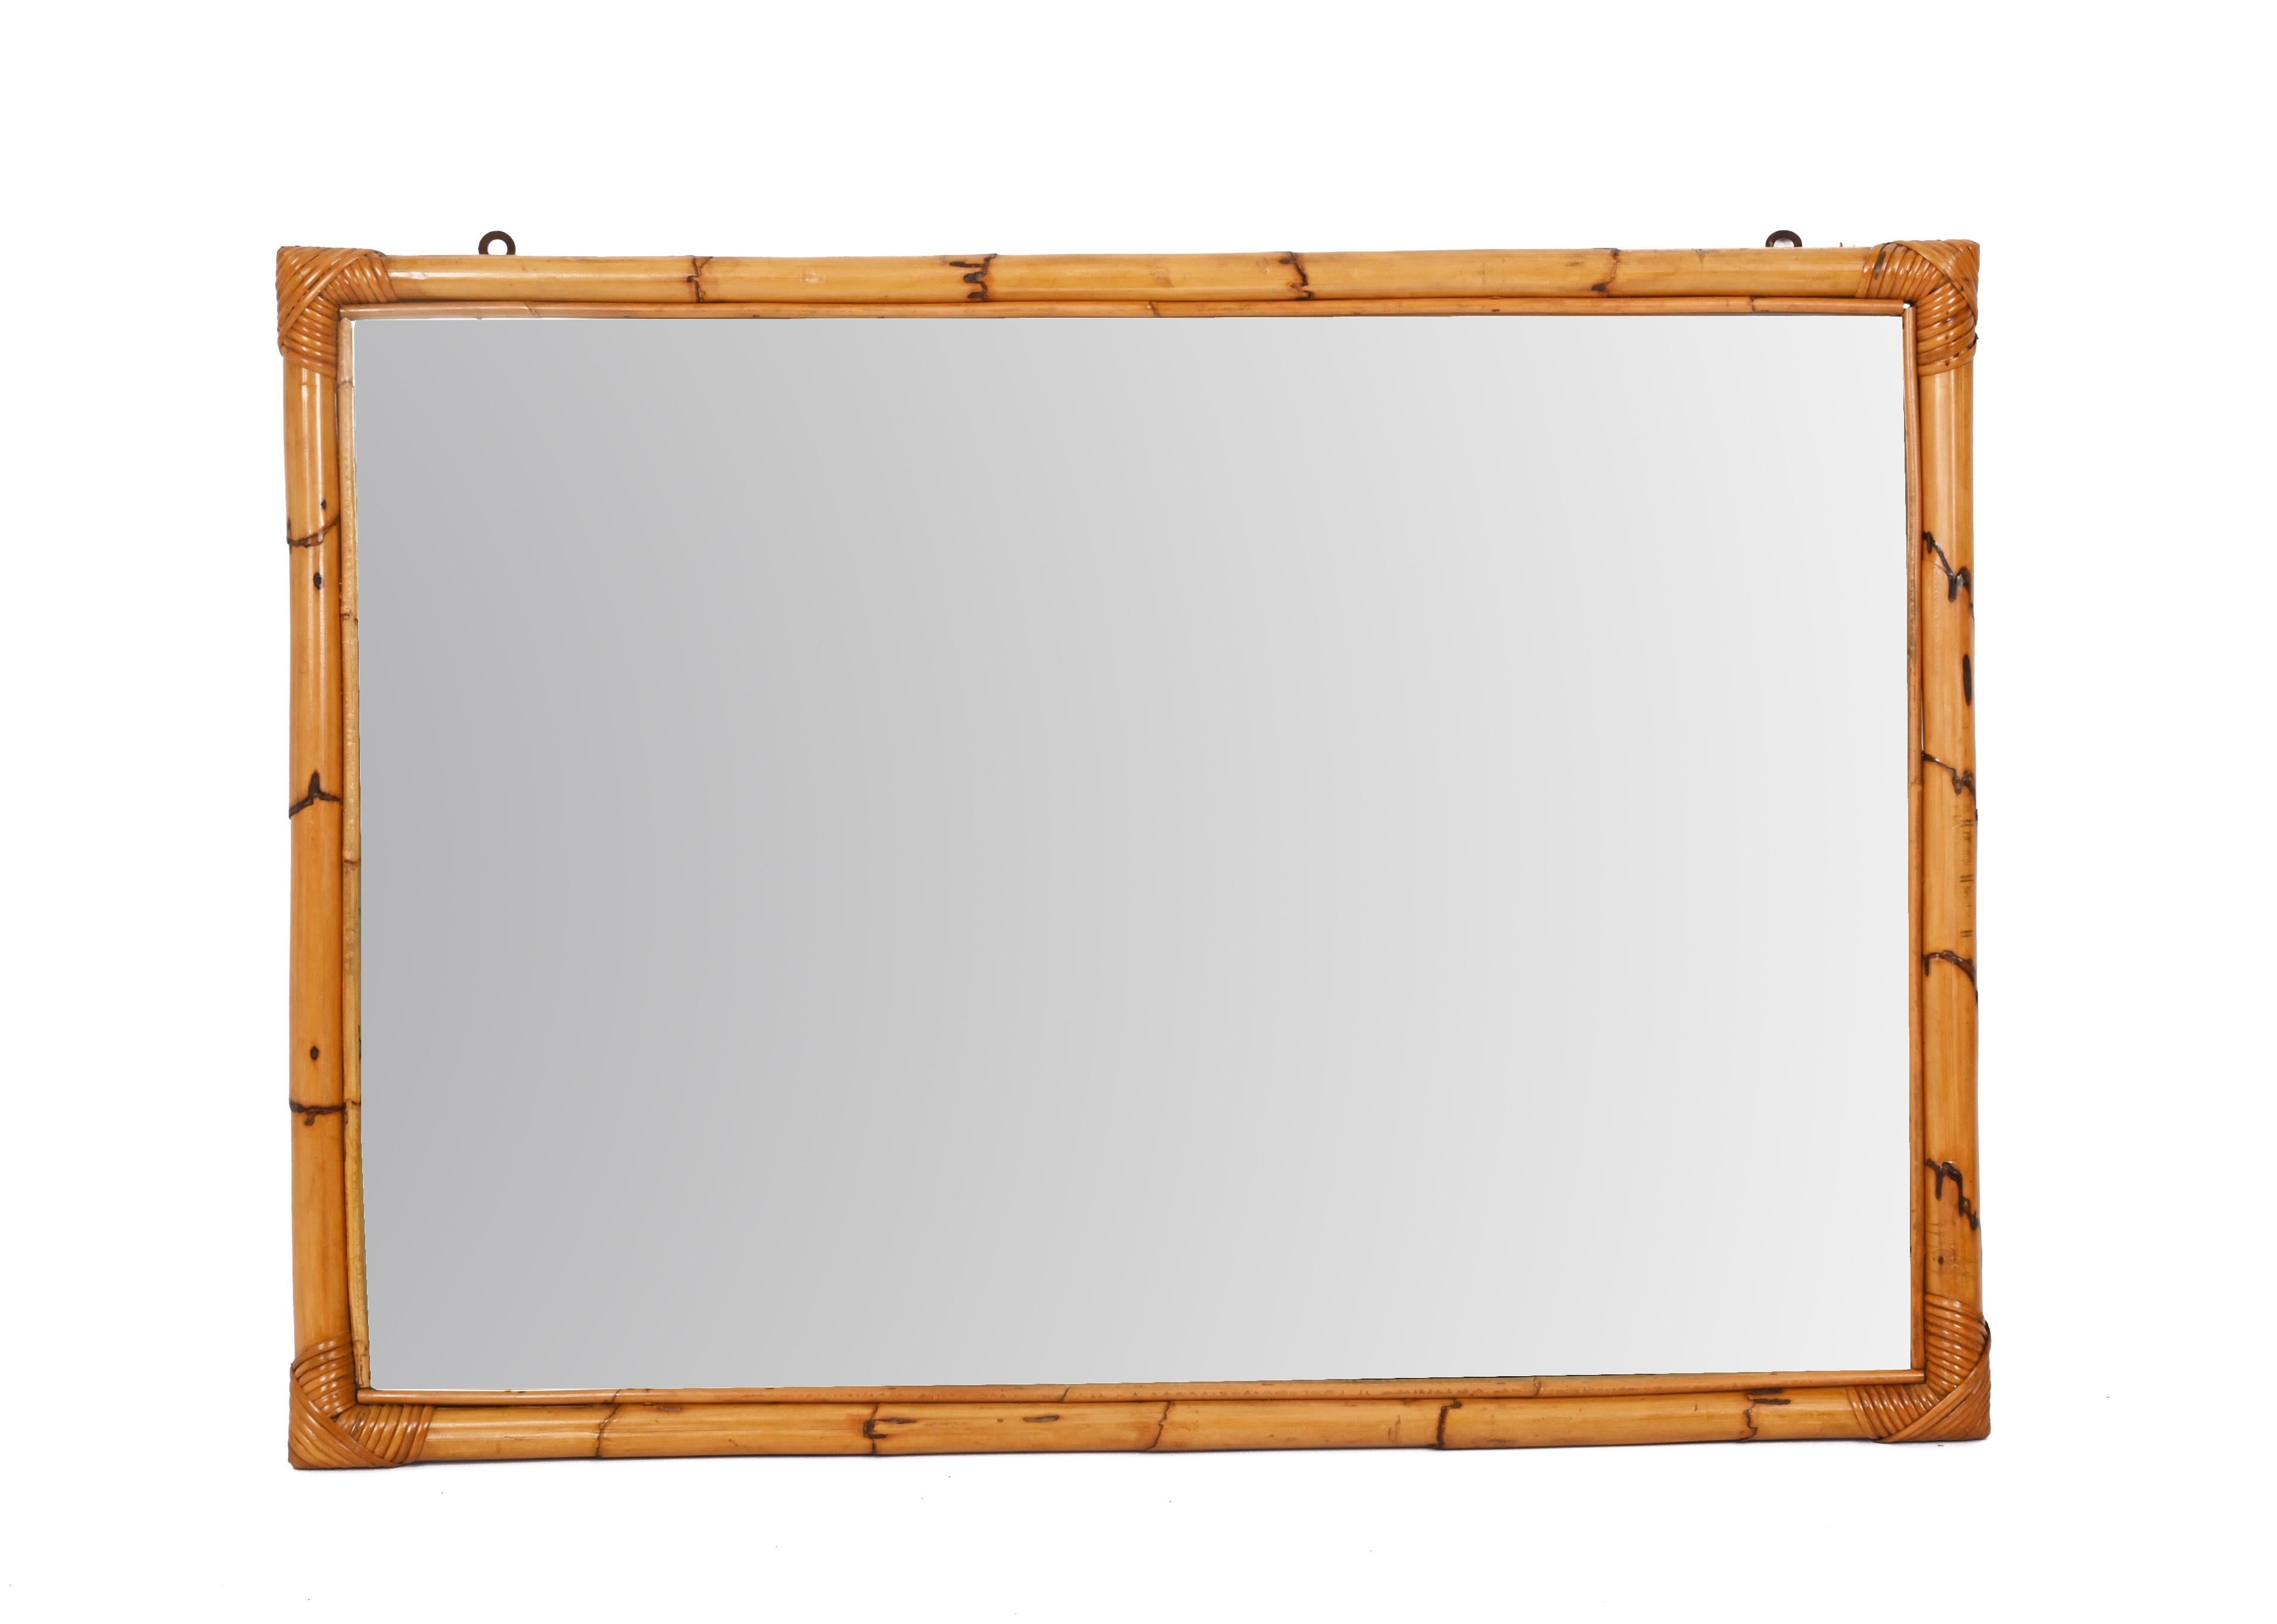 Midcentury Large Rectangular Italian Mirror with Double Bamboo Cane Frame, 1970s For Sale 3